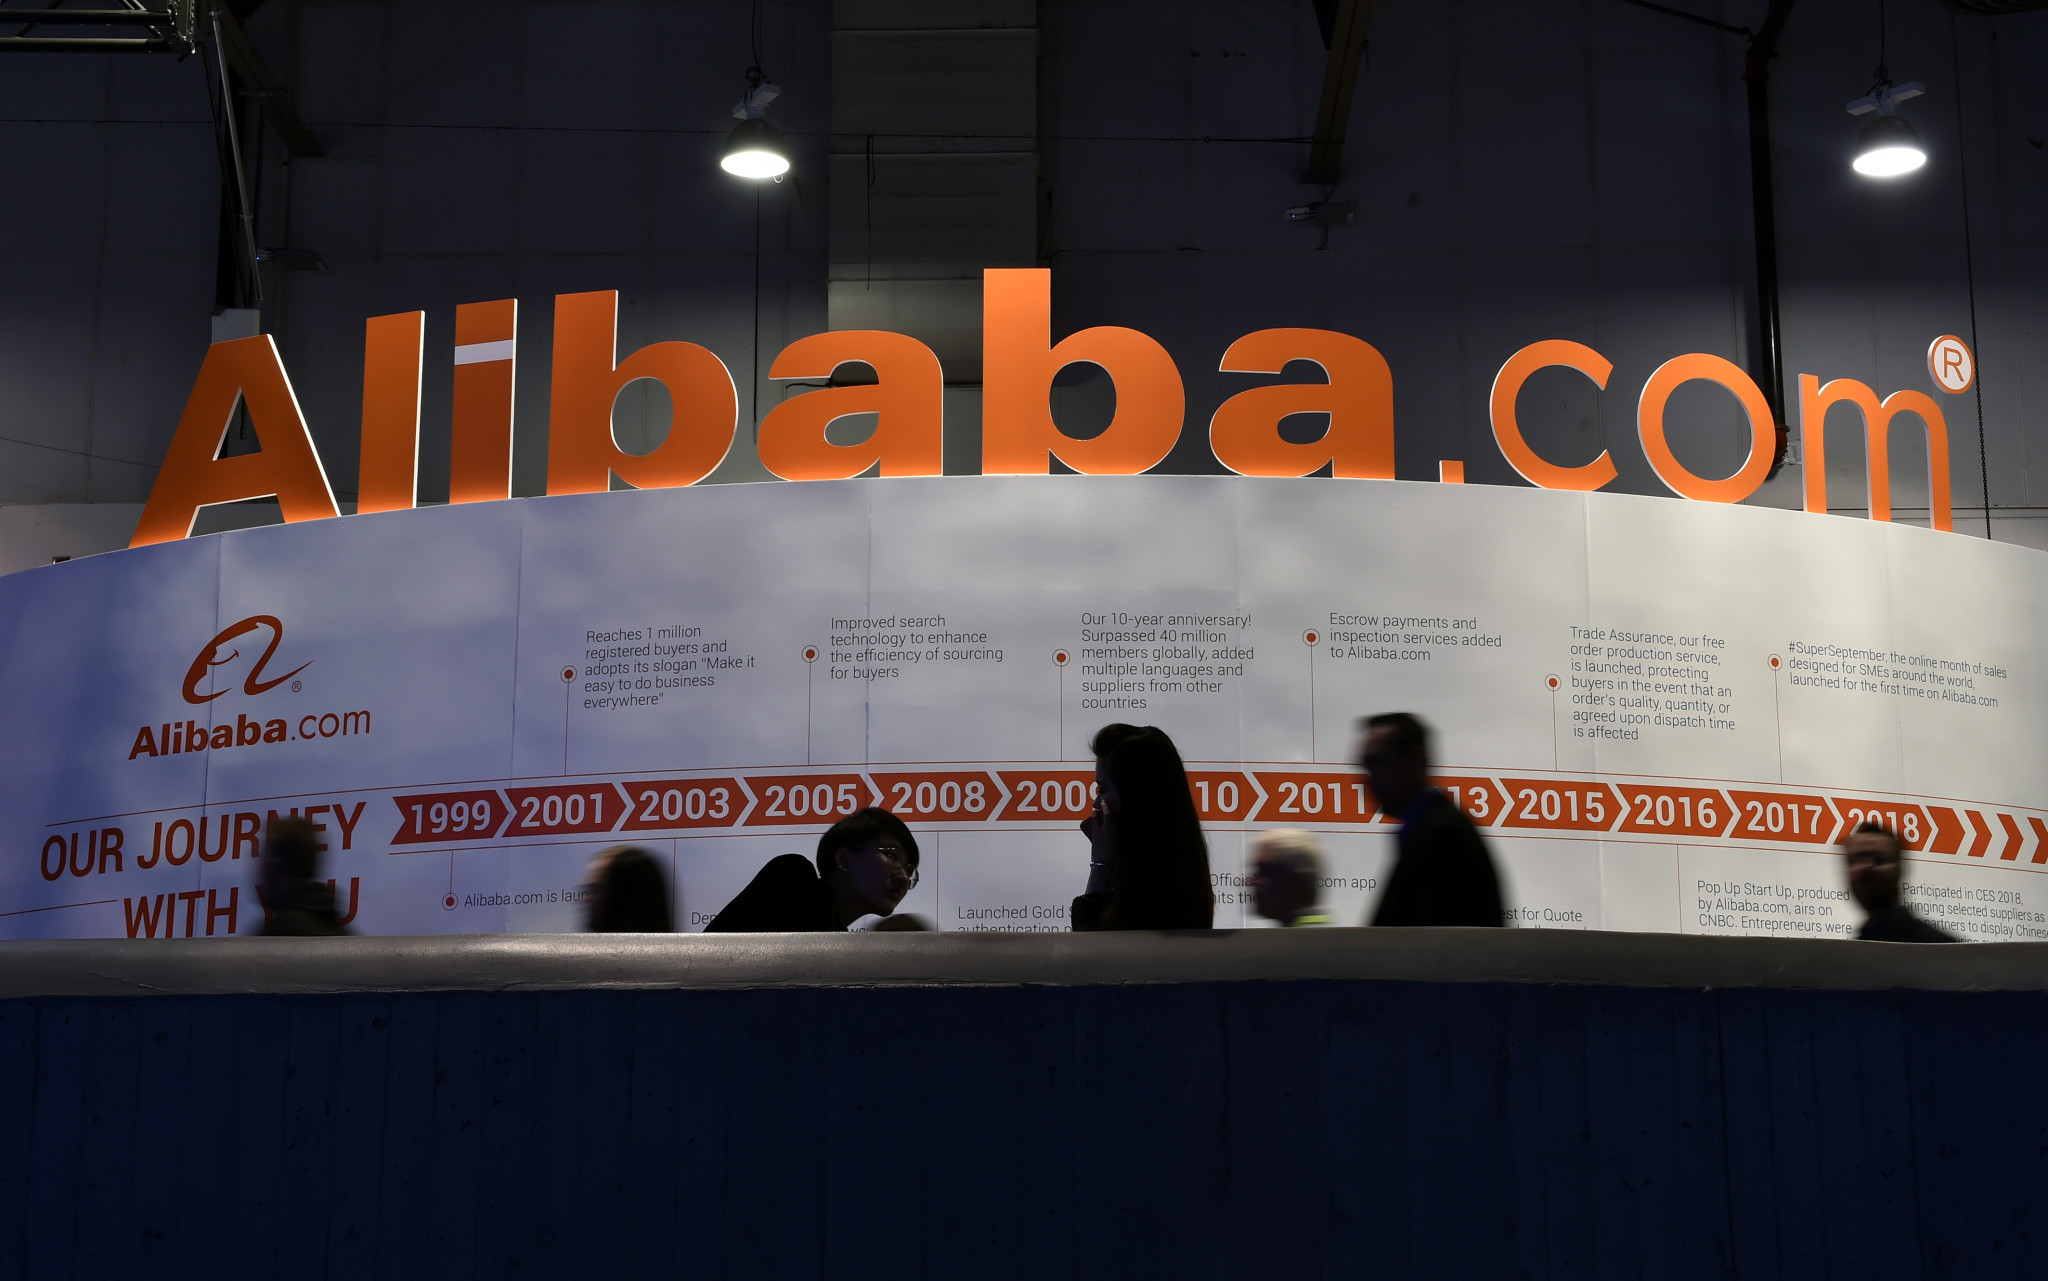 TOP sponsor Alibaba’s main business "back at pre-COVID-19 levels"